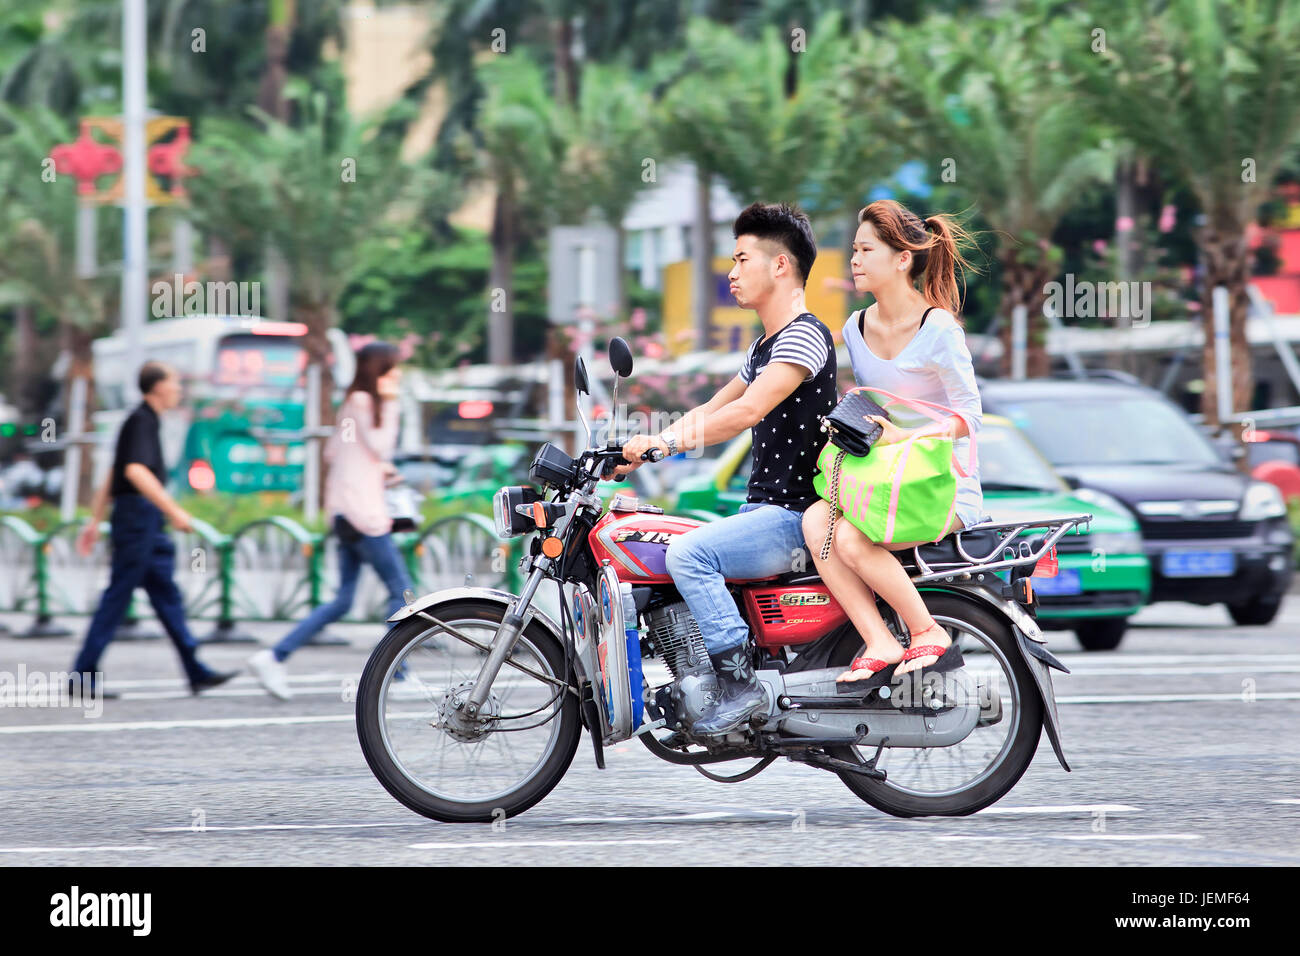 Chinese couple on motorcycle. Chinese motorcycle industry has exploded recent years. The production exceeds 10 million per 10 million per year. Stock Photo